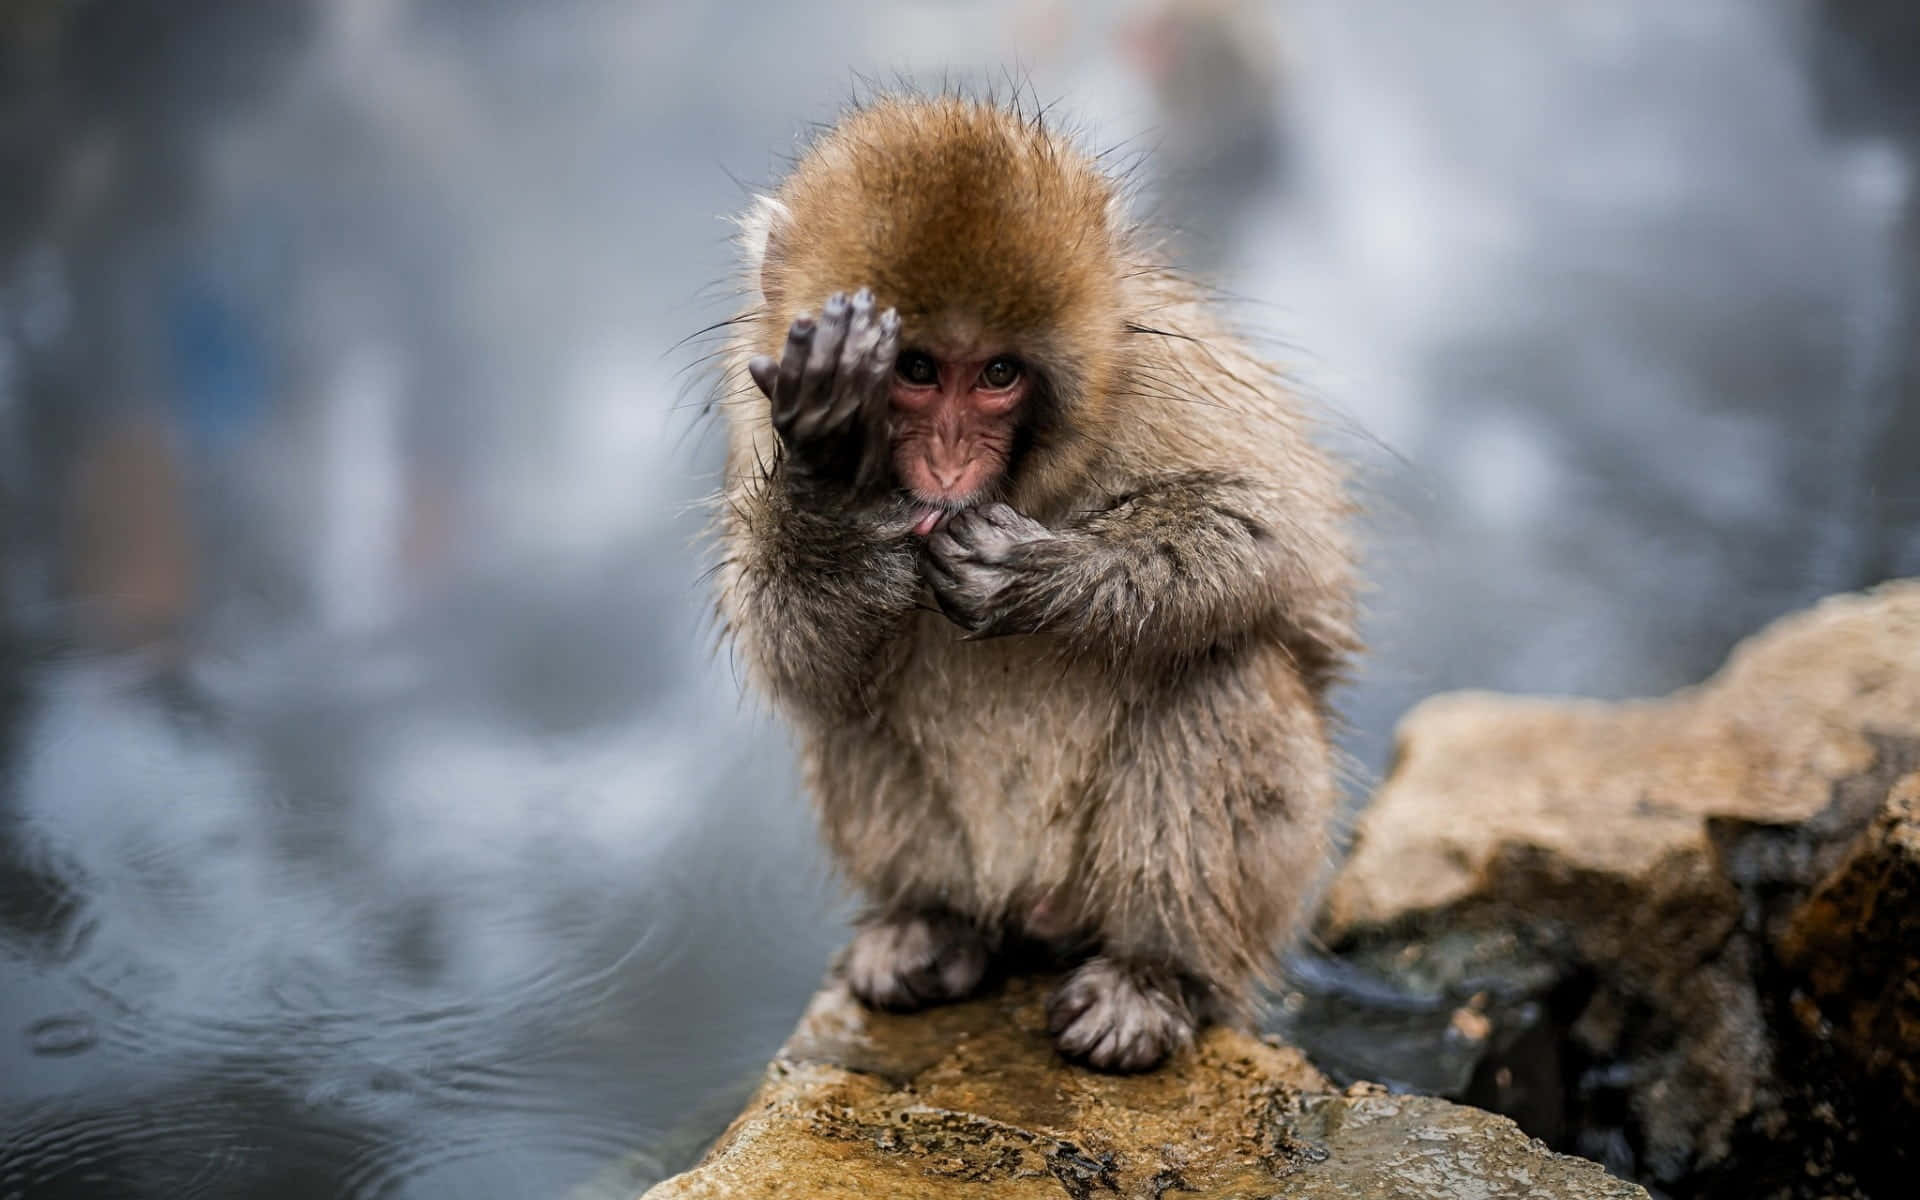 A Monkey Is Sitting On Rocks And Looking At The Water